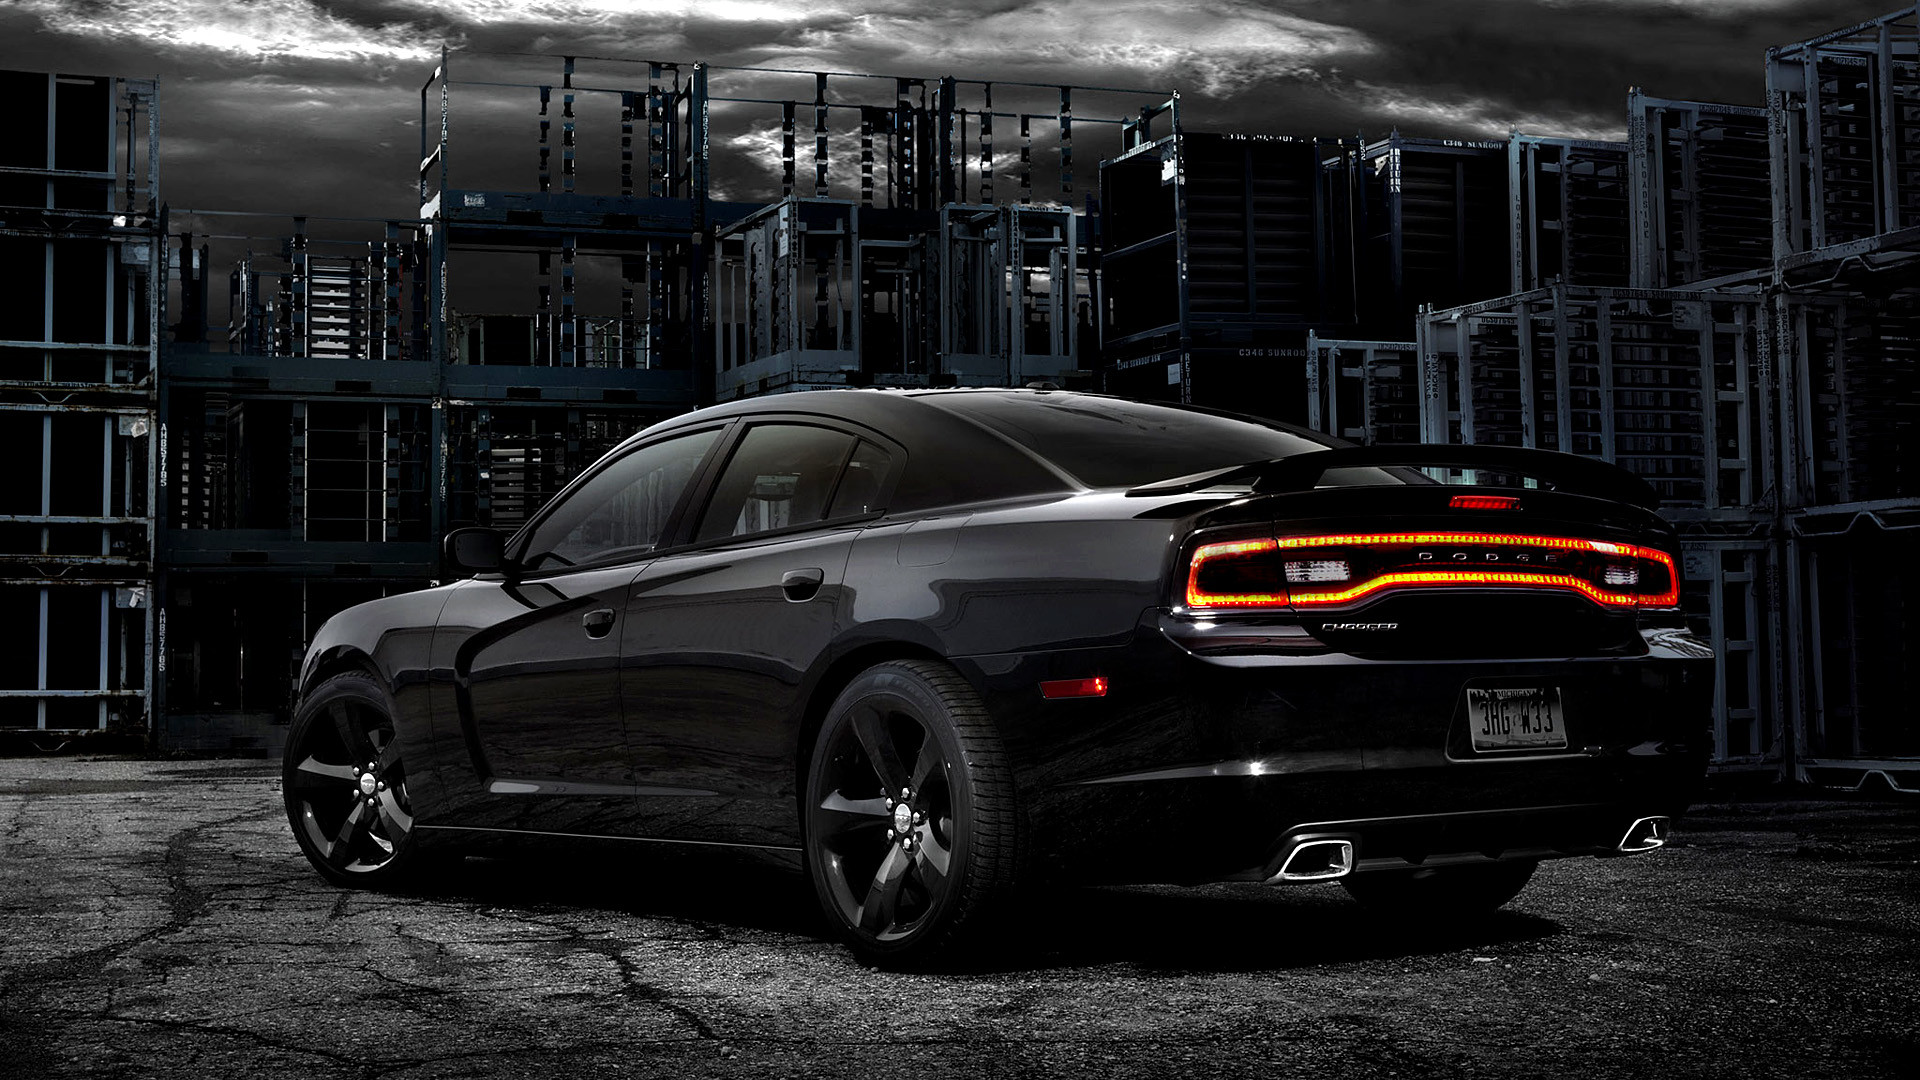 1920x1080 2012 Dodge Charger Blacktop picture